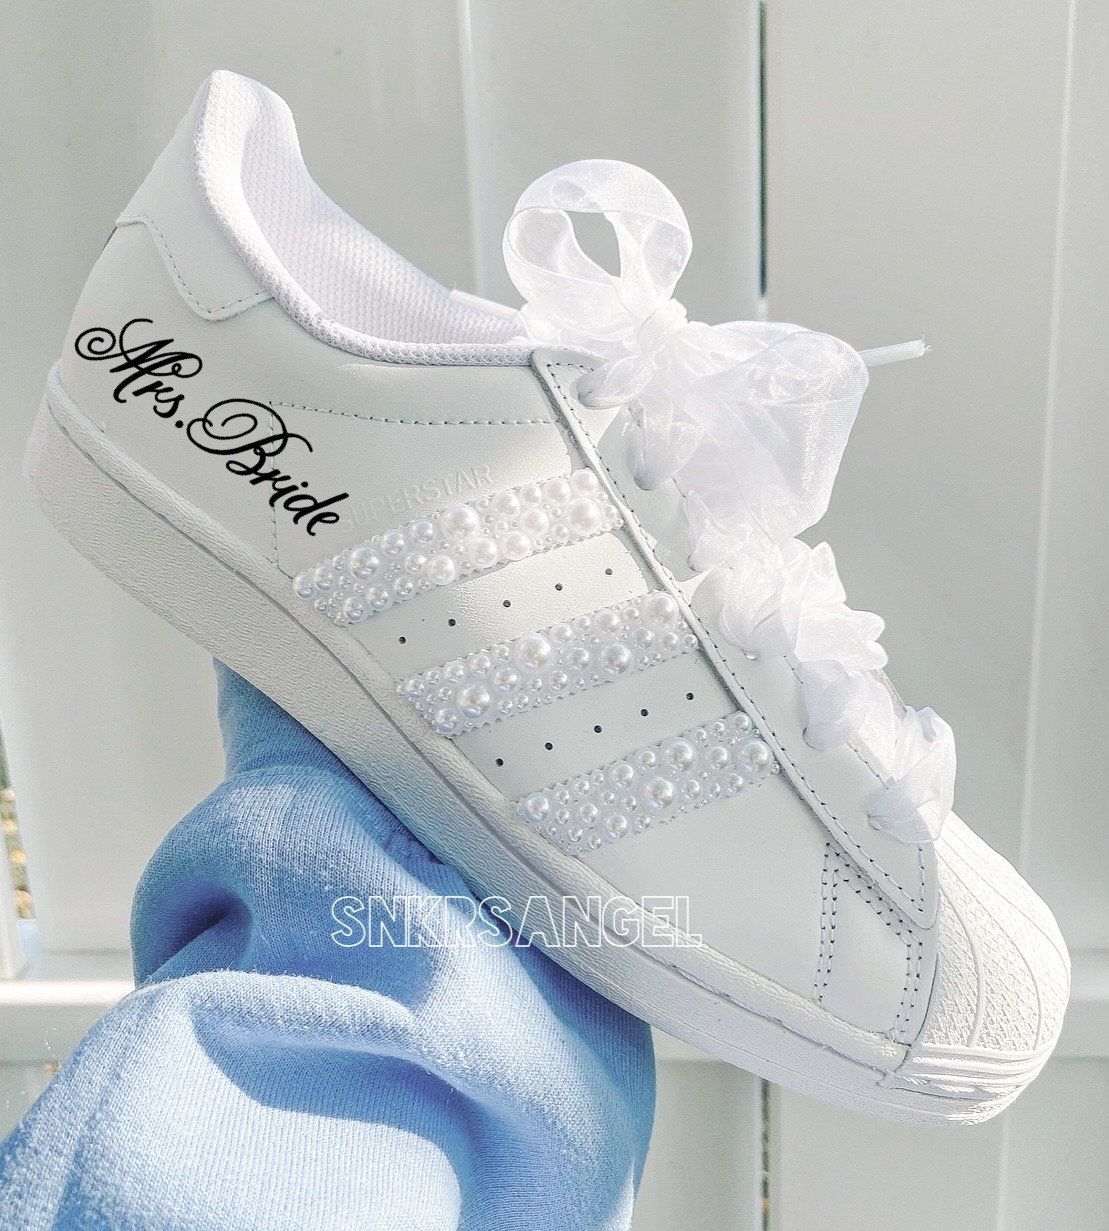 Adidas Superstar custom made, buy greek artist. perfect with all